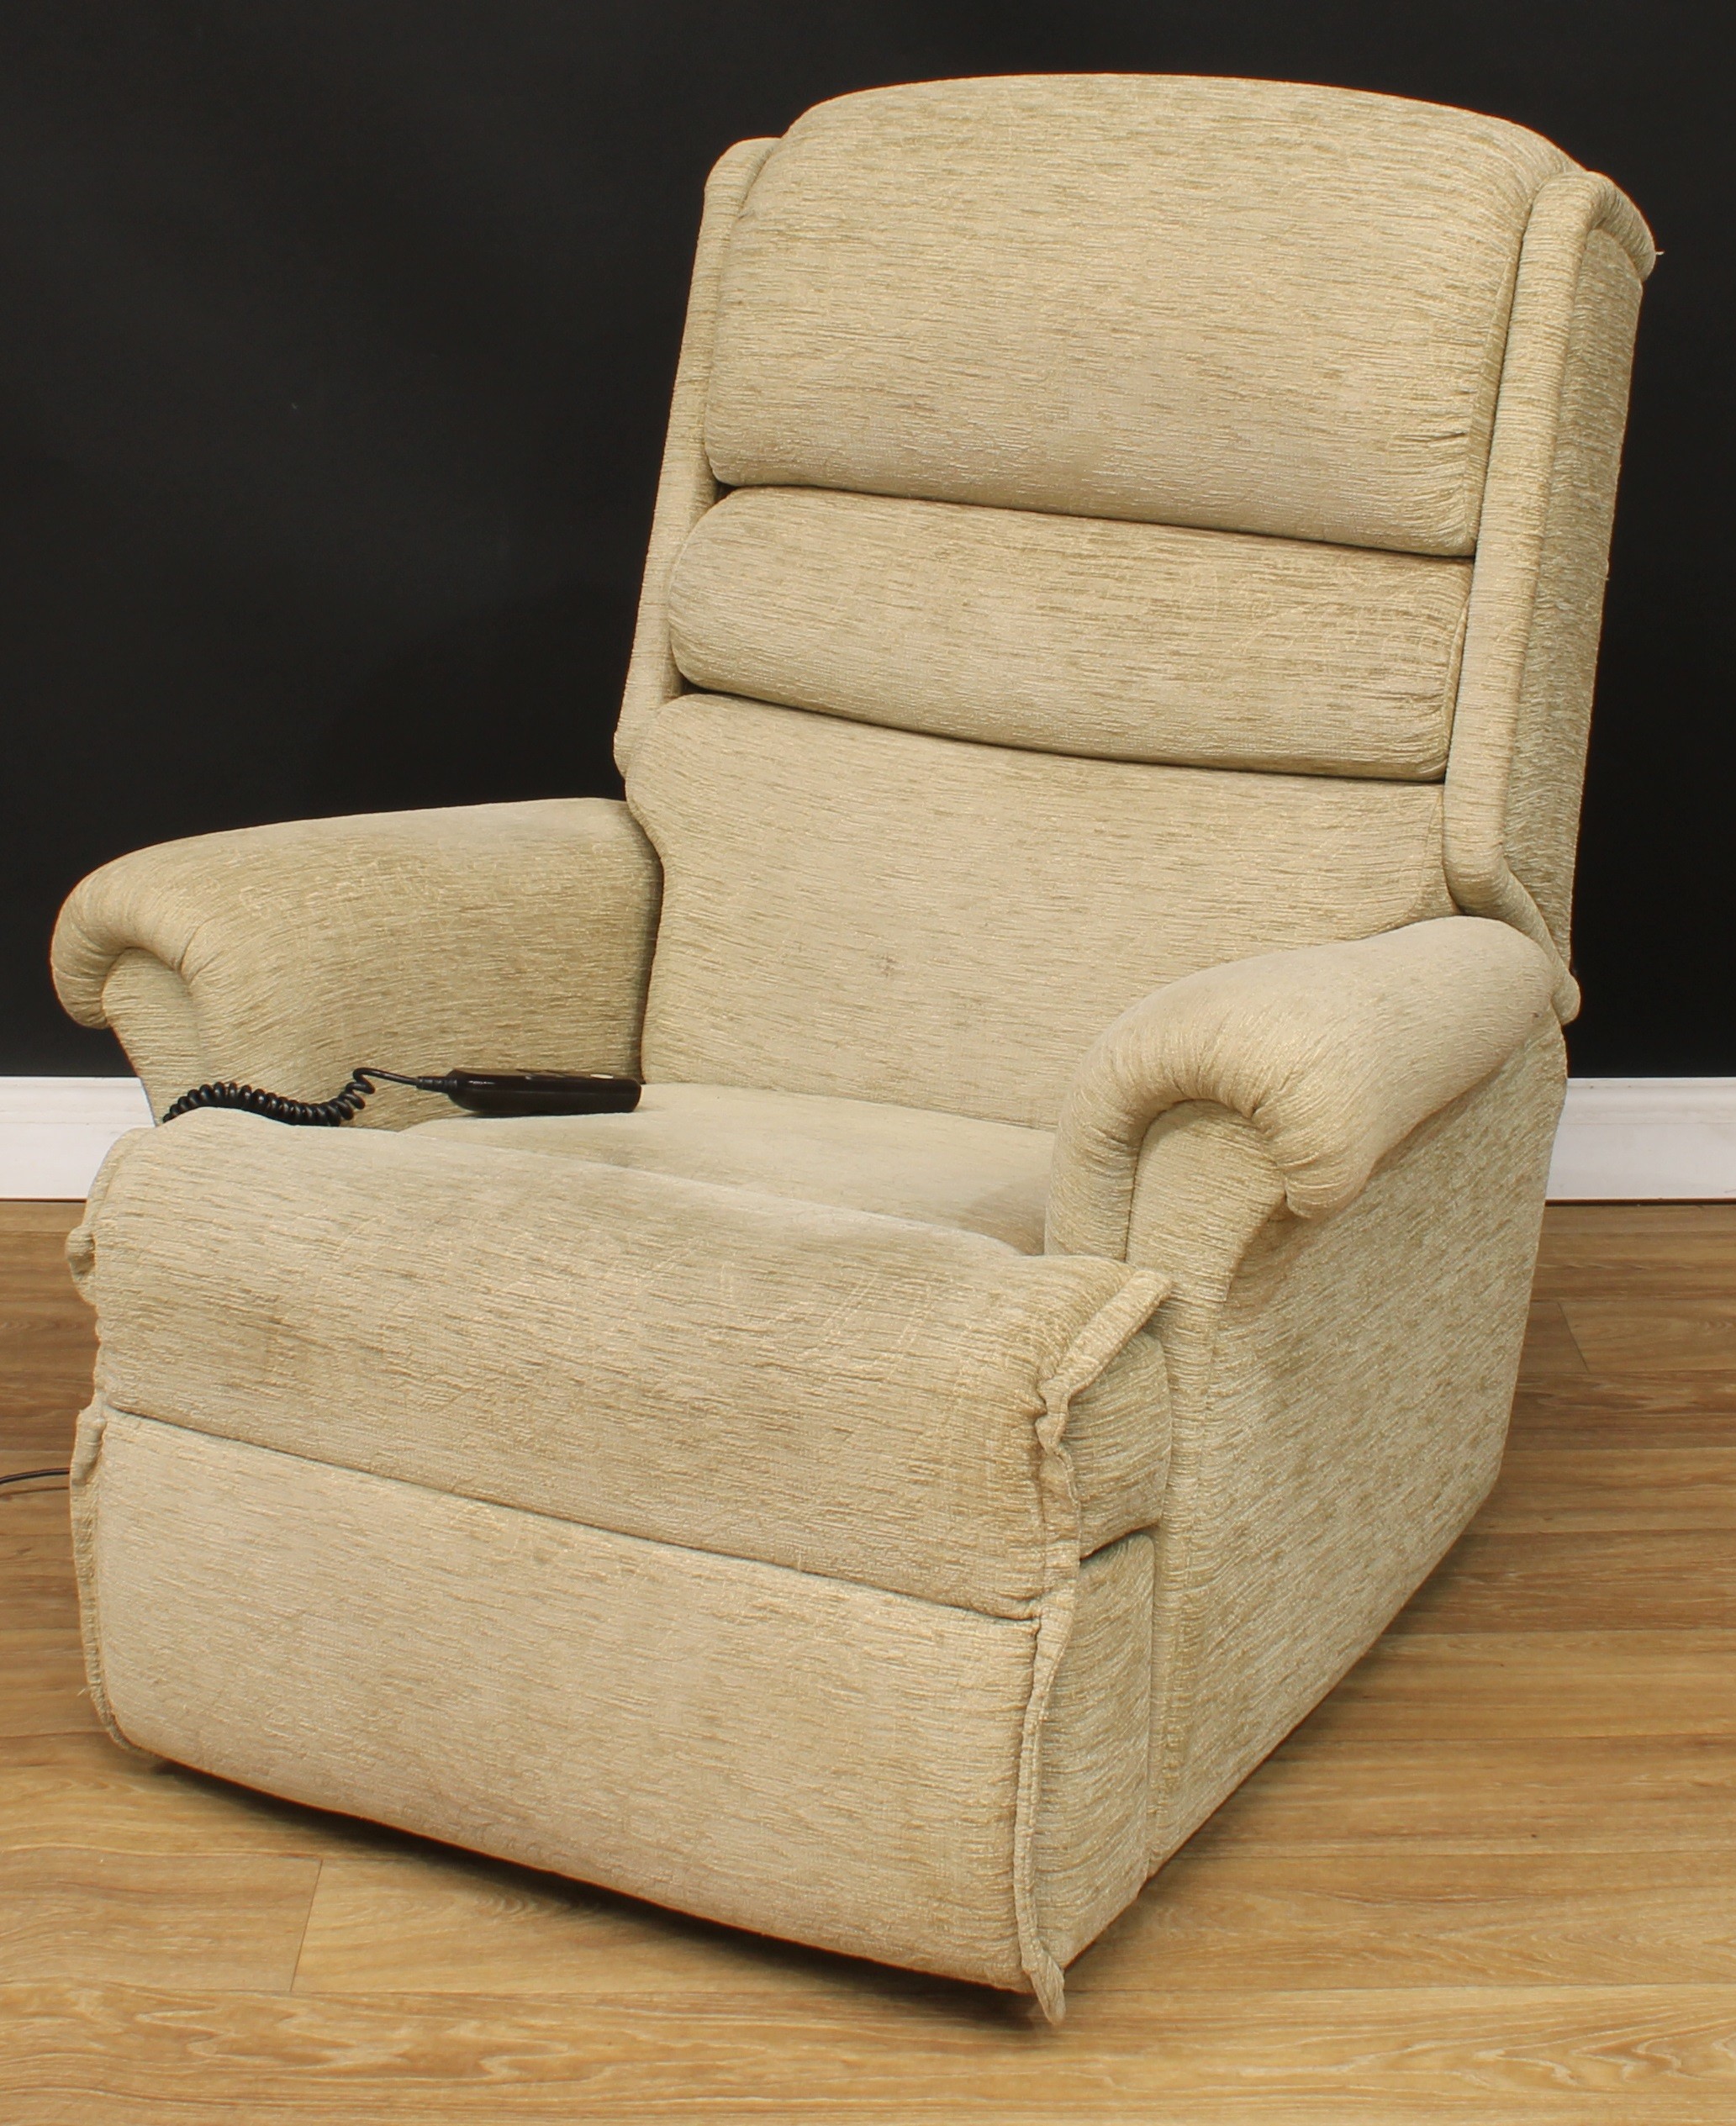 A Sherborne electric recliner armchair, 108cm high, 98cm wide, the seat 54cm wide and 51cm deep